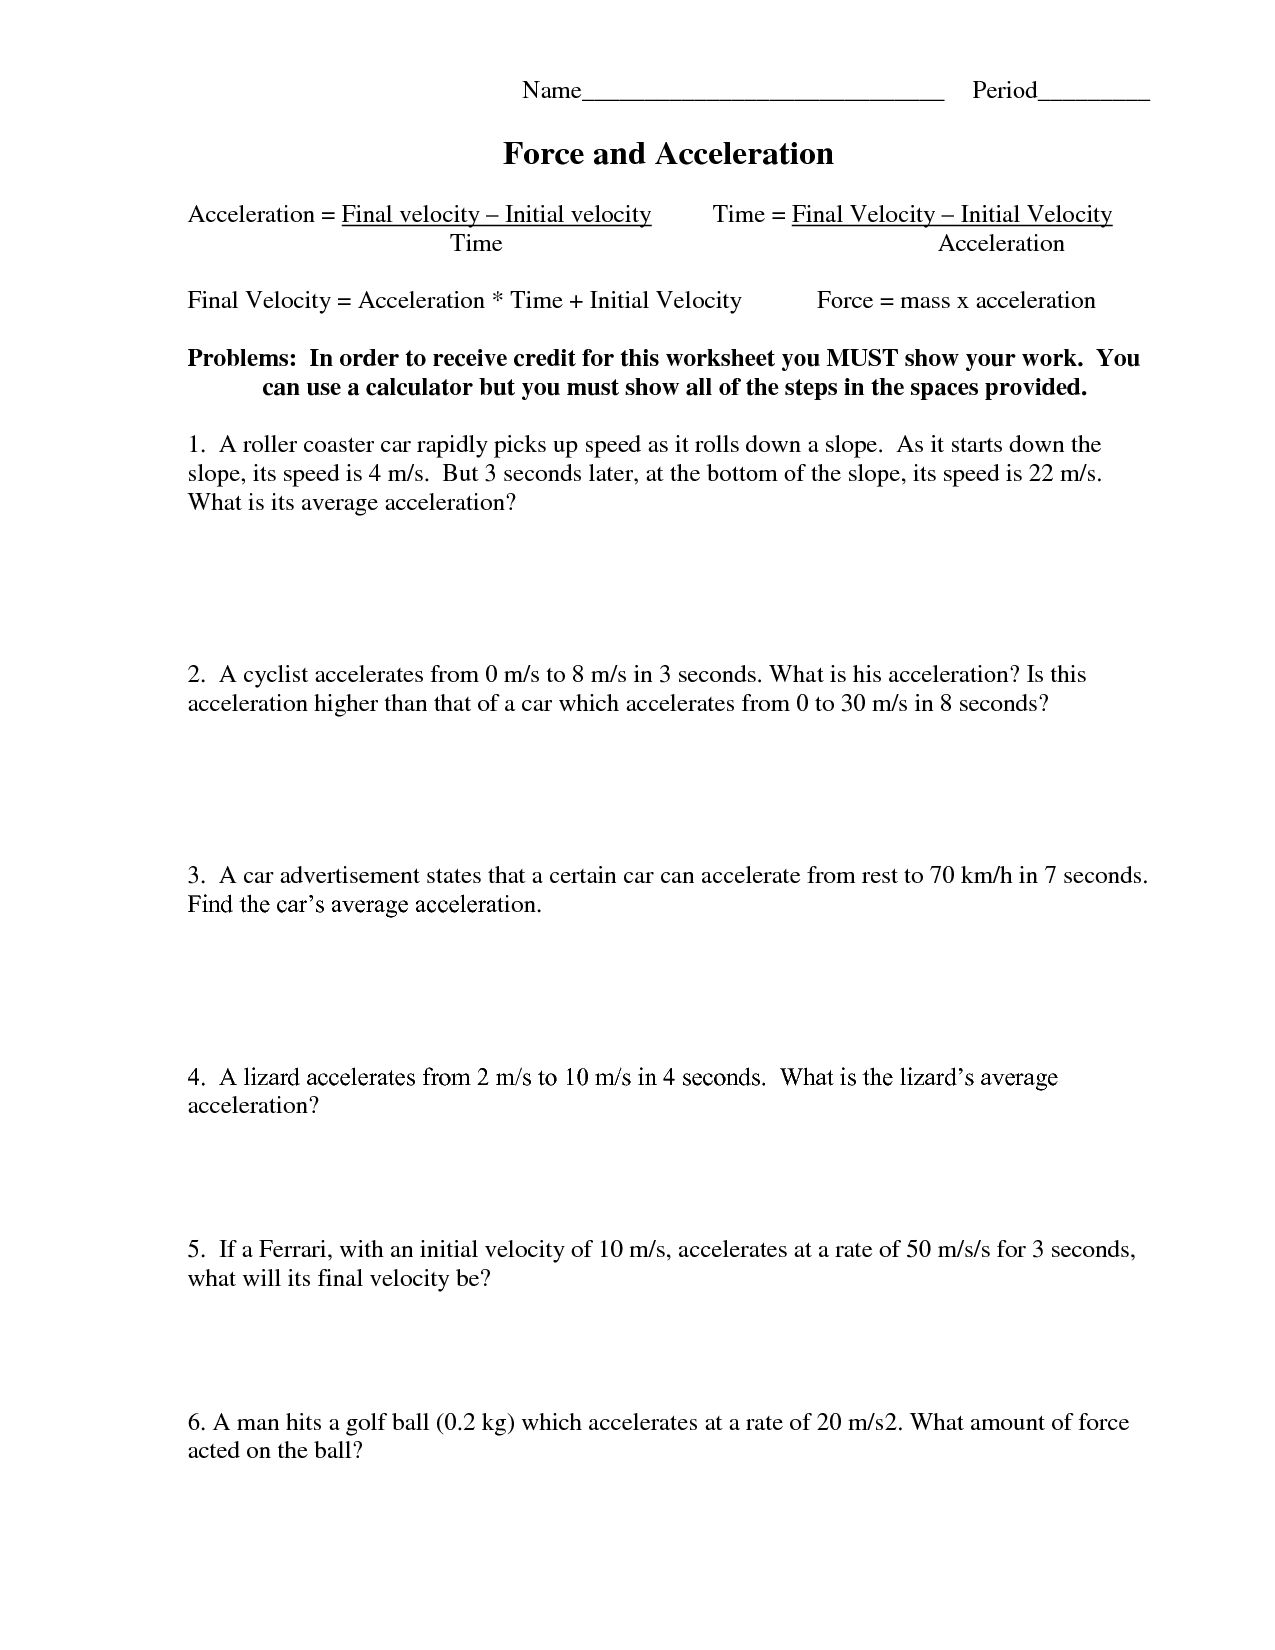 Net Force And Acceleration Worksheet Answers  Briefencounters Along With Force And Acceleration Worksheet Answers